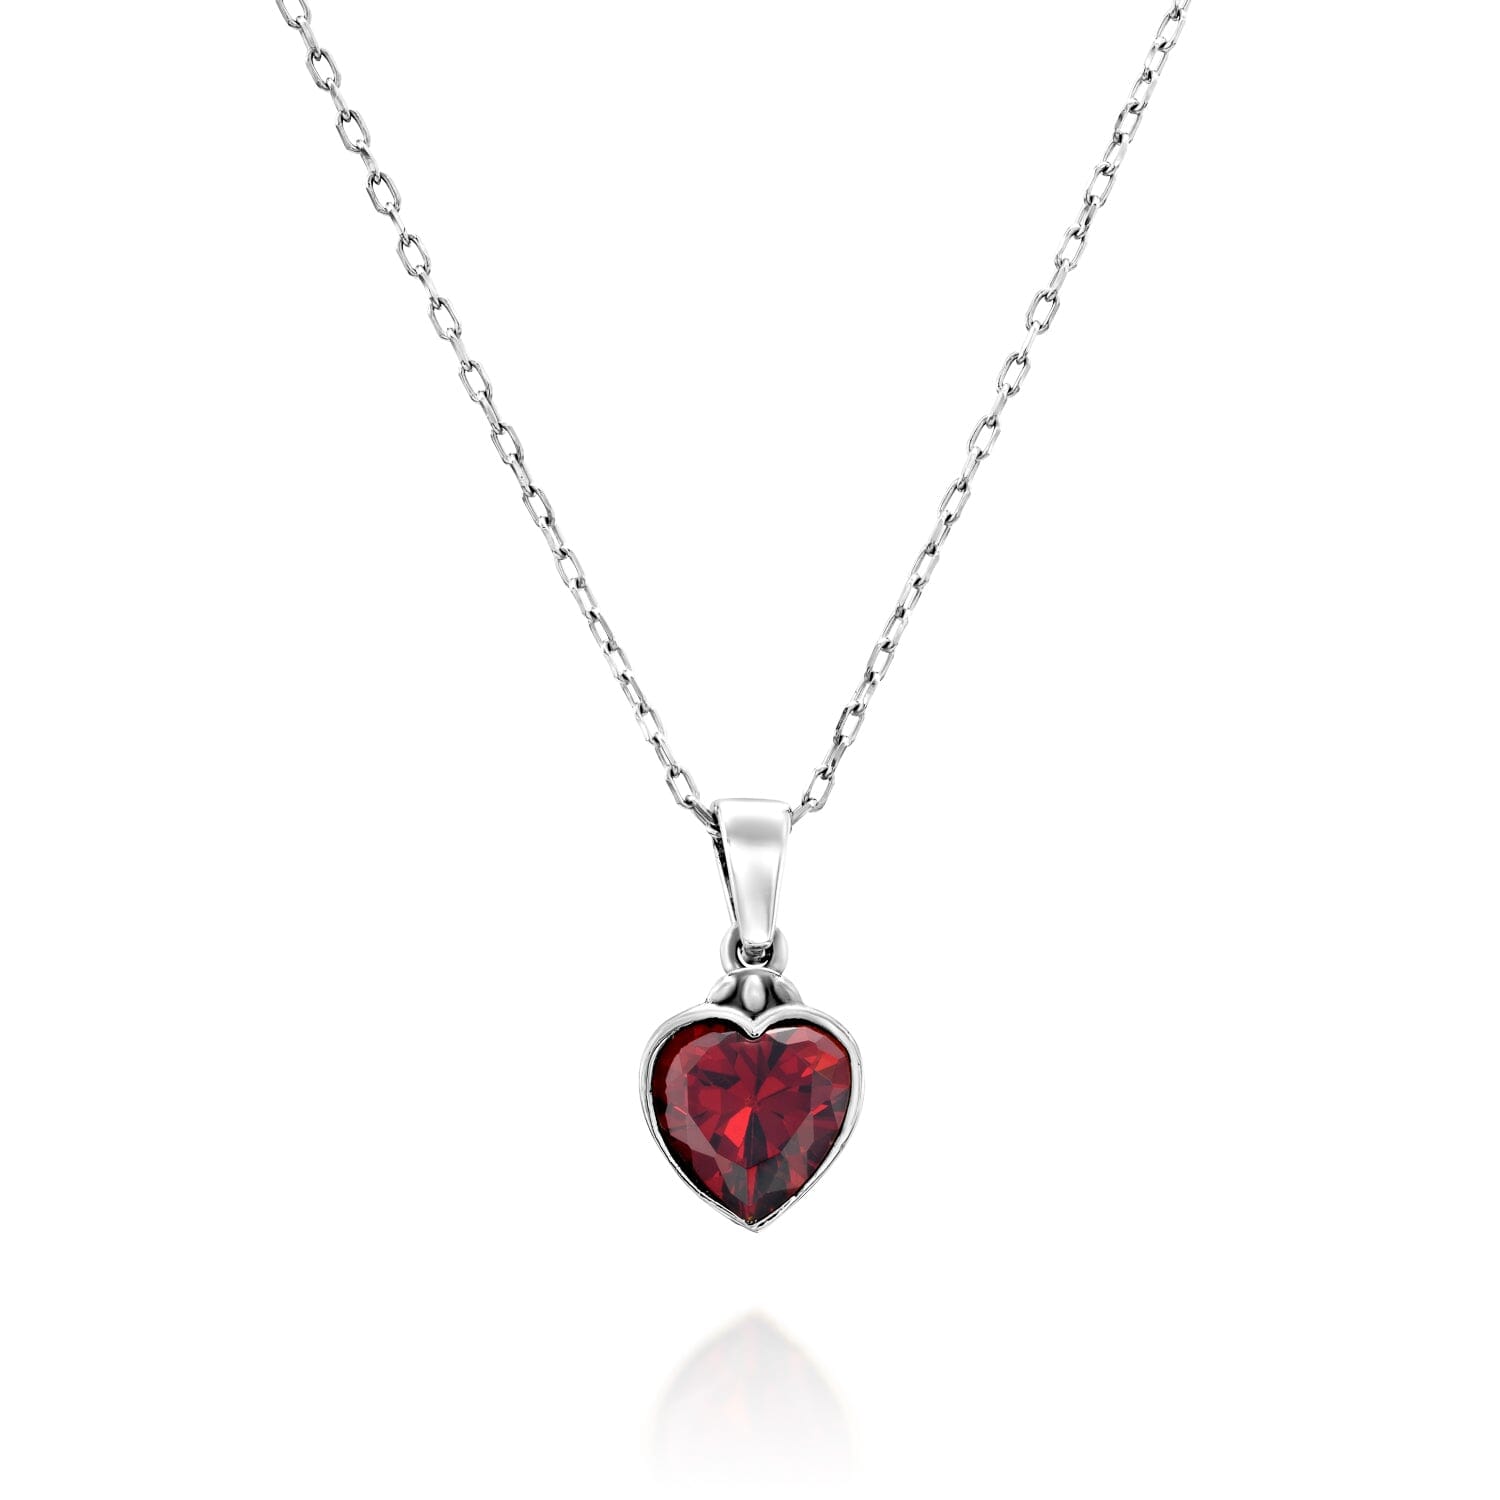 AMORE NECKLACE